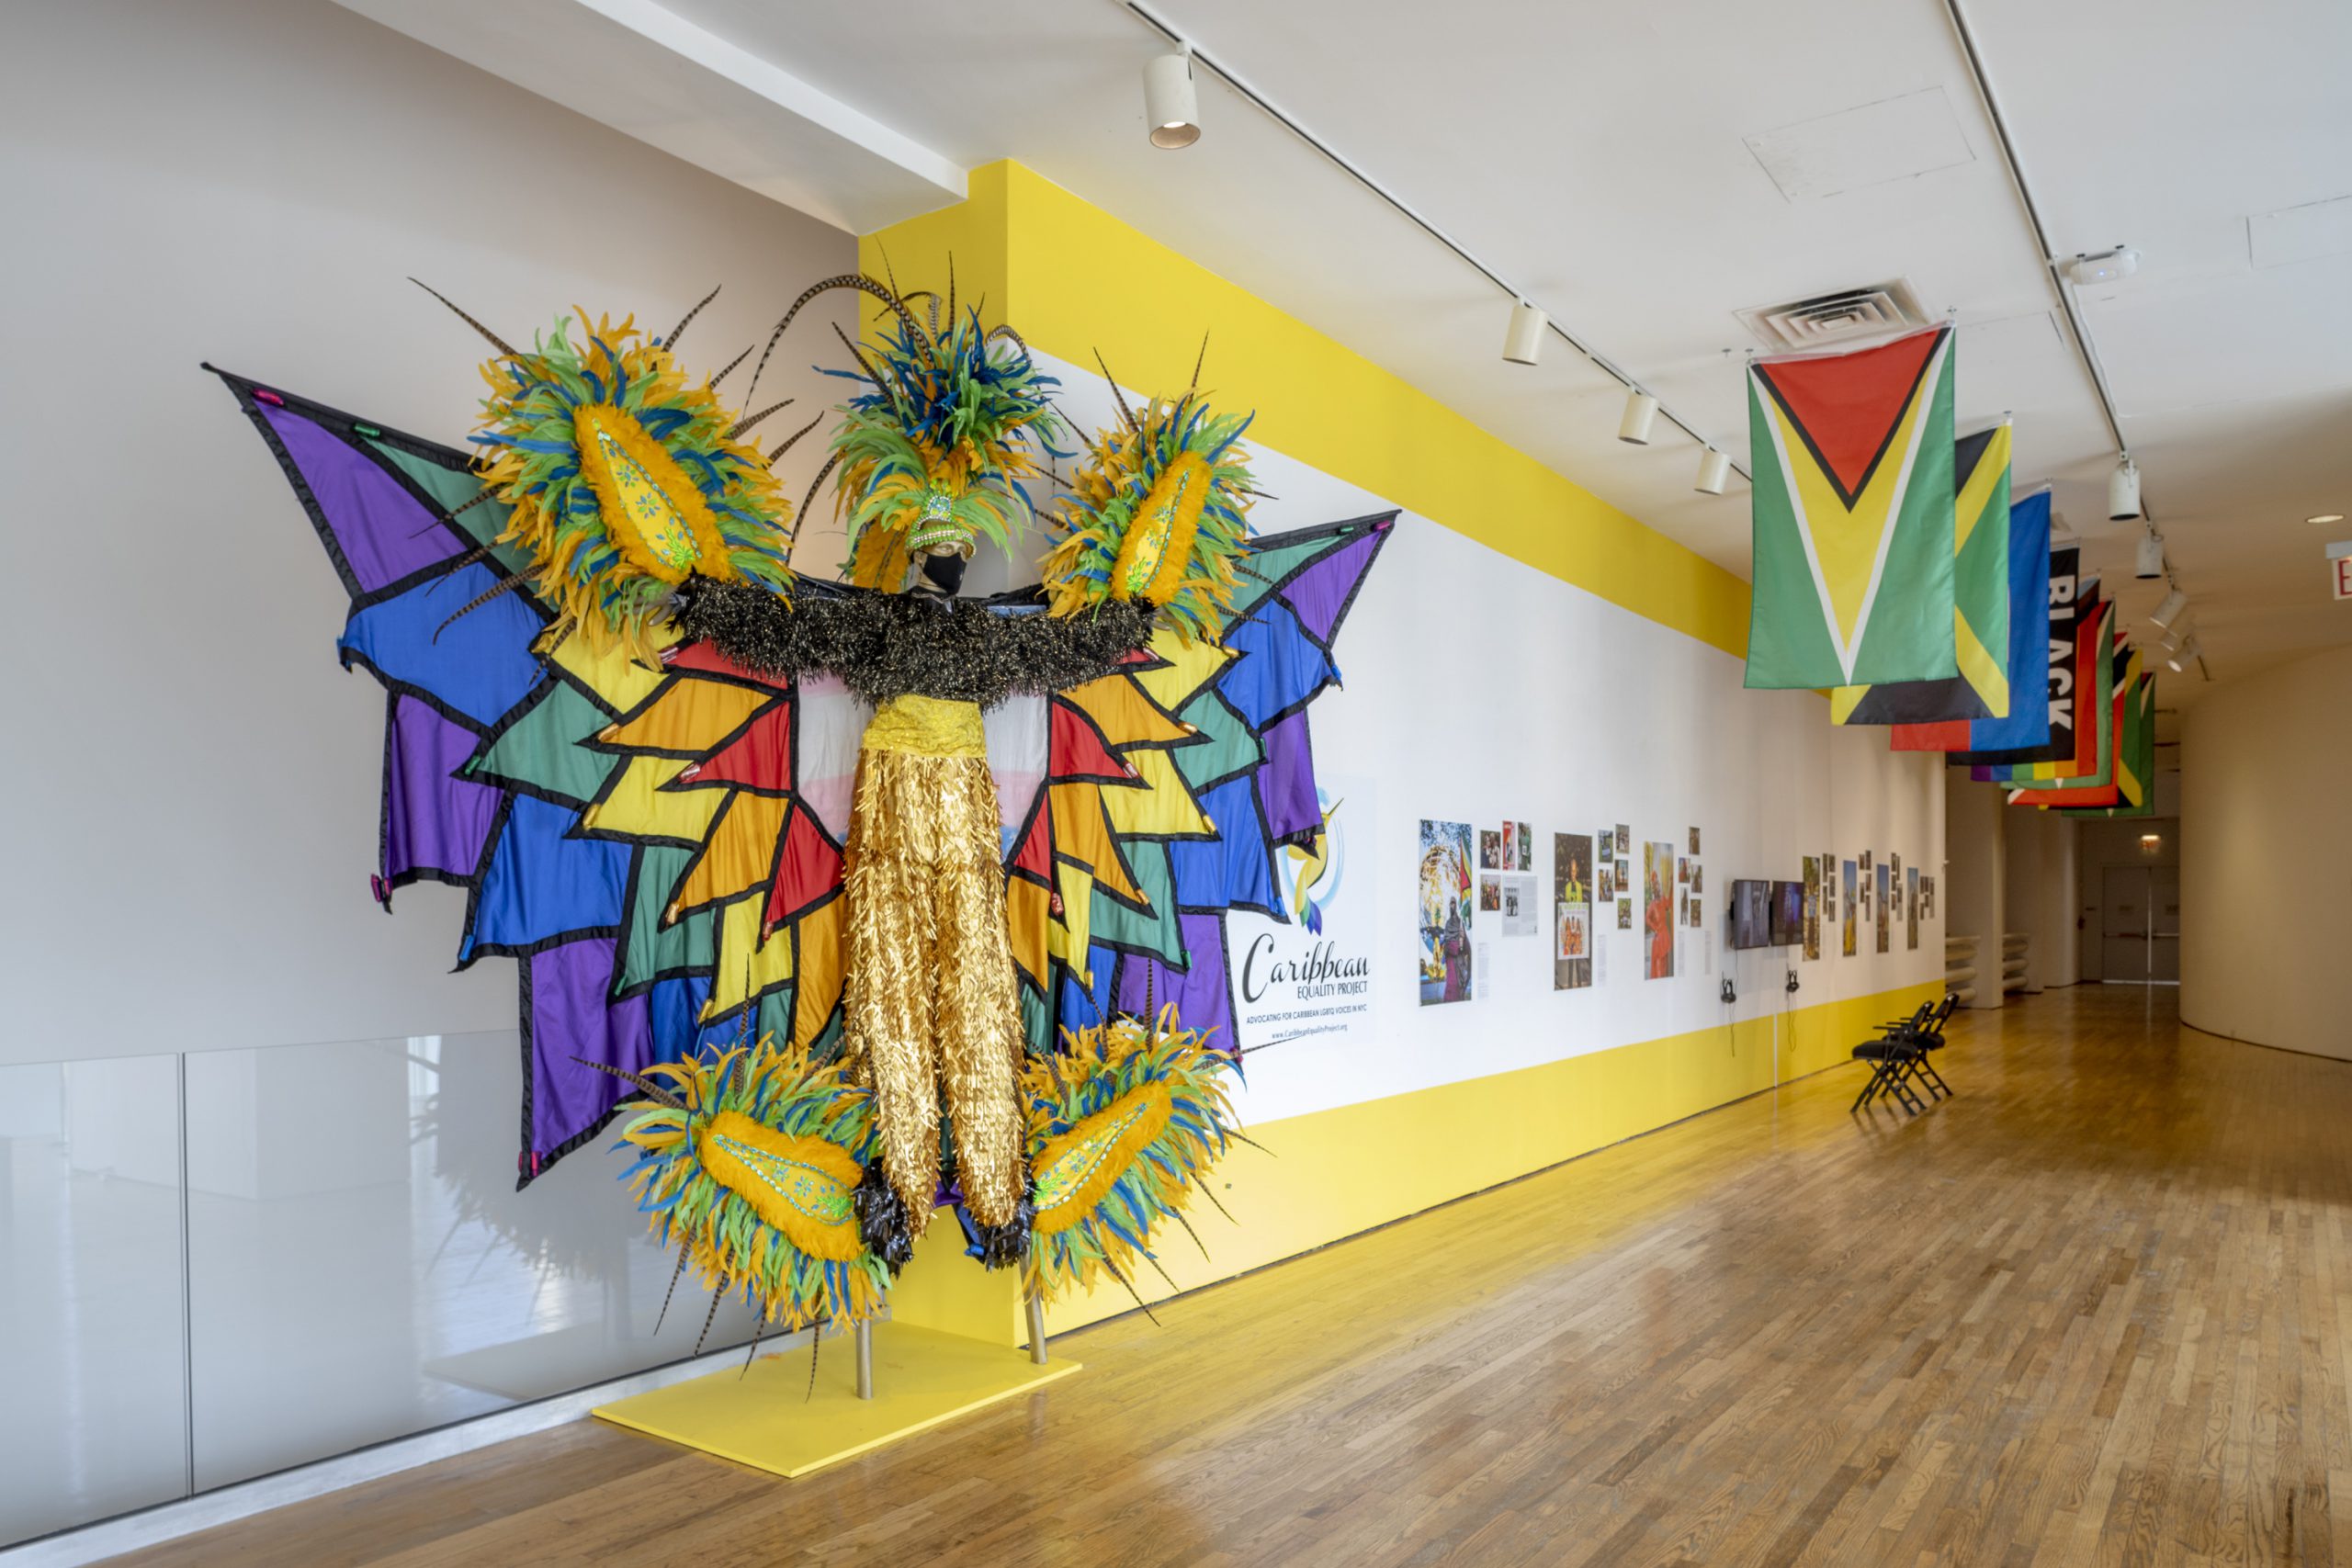 Down a hallway, Photographs, news articles and video installations hang on a yellow and white wall with different Caribbean country flags, a rainbow LGBTQ+ flag, and Black Lives Matter flag, hanging from the ceiling in a row parallel to the wall. At the beginning of the hallway is a mannequin wearing a festive, bright colored, colorful, feathered, carnival outfit.